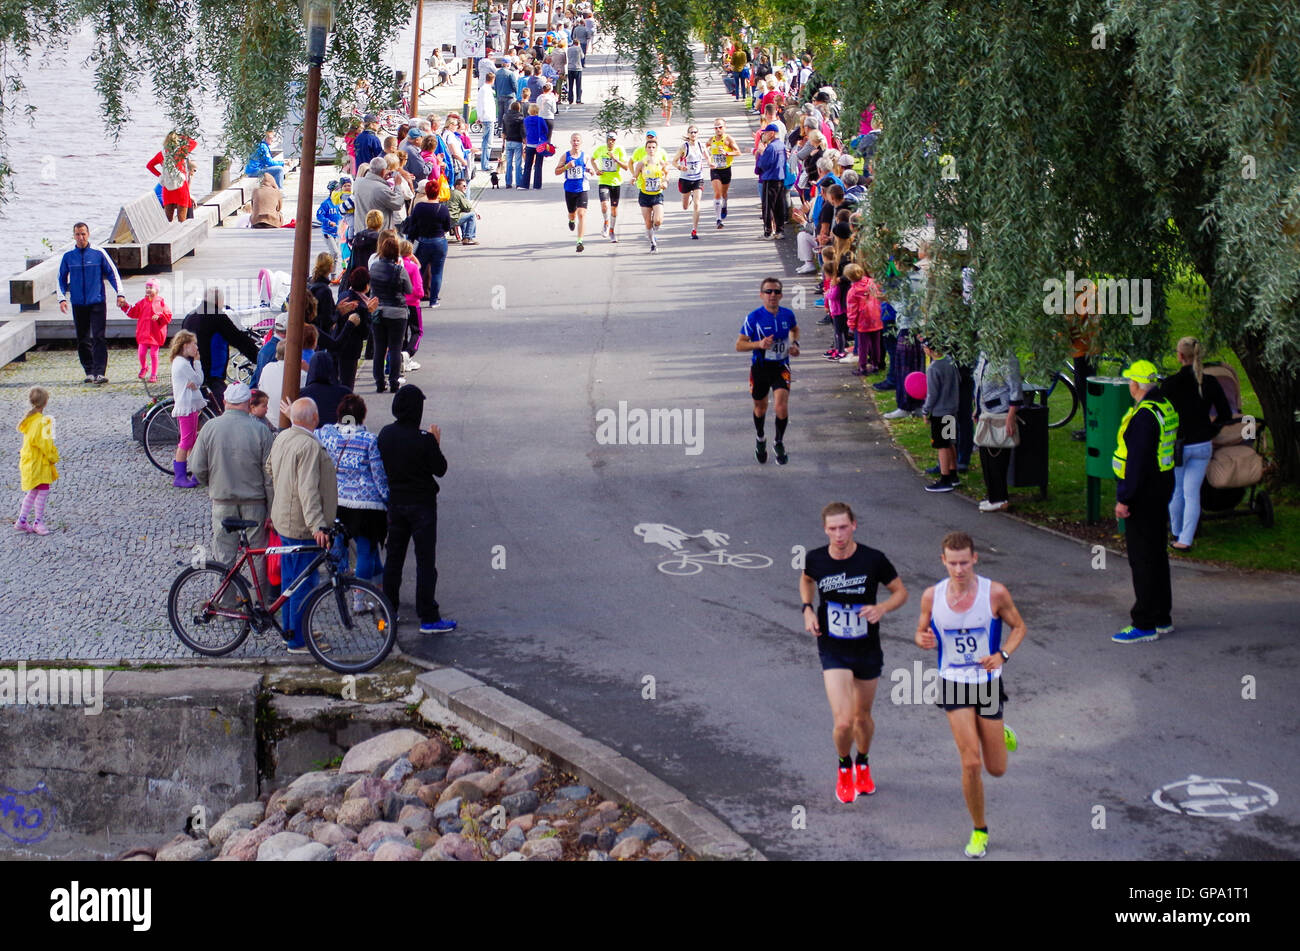 Athletes participating in Kahe Silla Jooks, the sports event of the year in Pärnu, Estonia Stock Photo